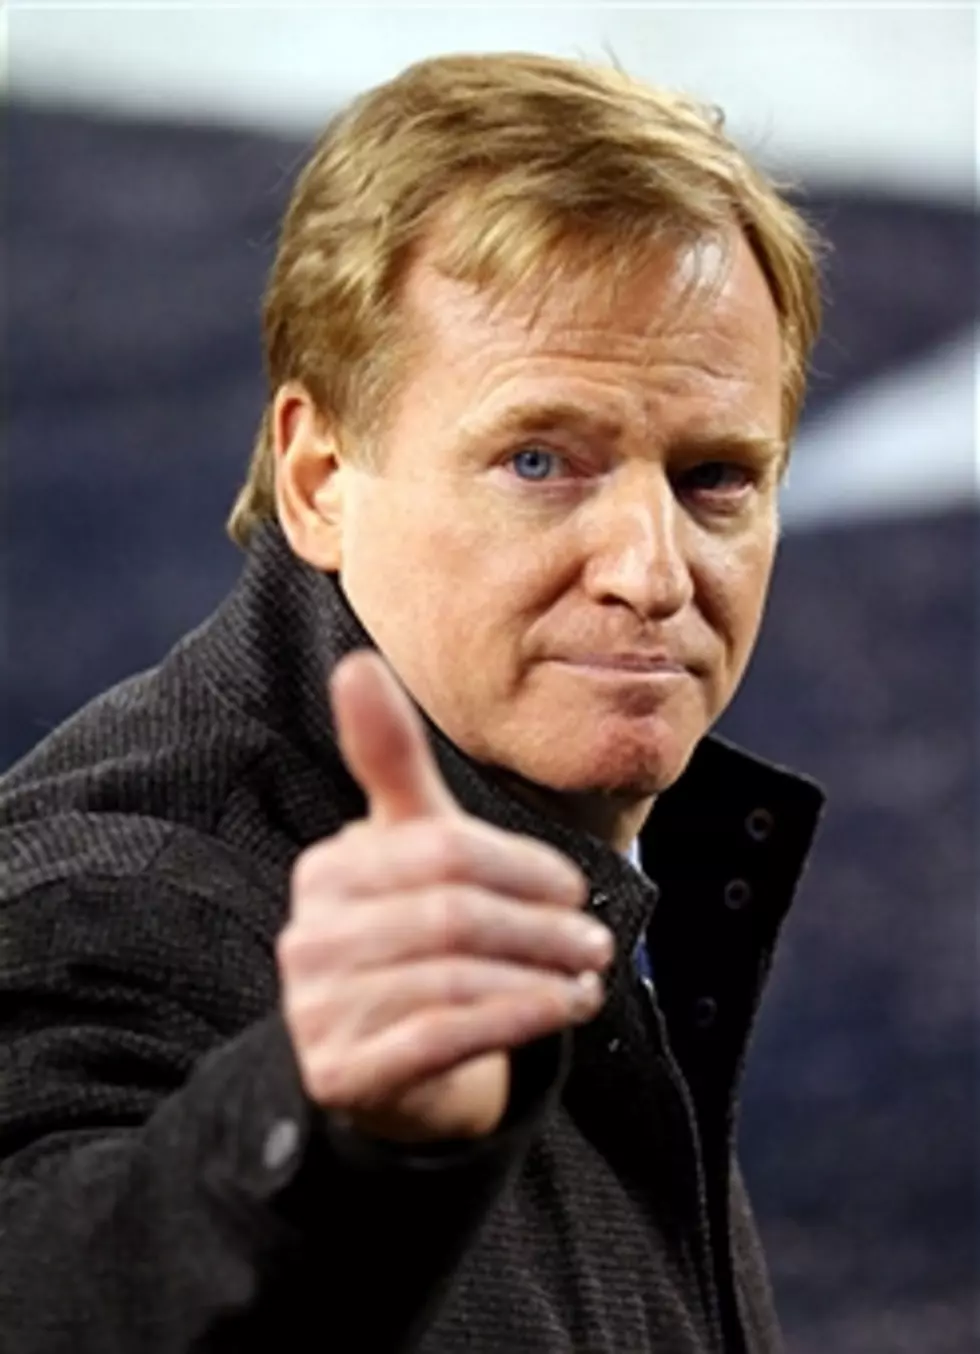 Roger Goodell Will Not Hear the Appeal of Roger Goodell’s Decision to Suspend Ray Rice Indefinitely, Which is Different from Roger Goodell’s Original Decison that Roger Goodell Made – From the Bird’s Nest